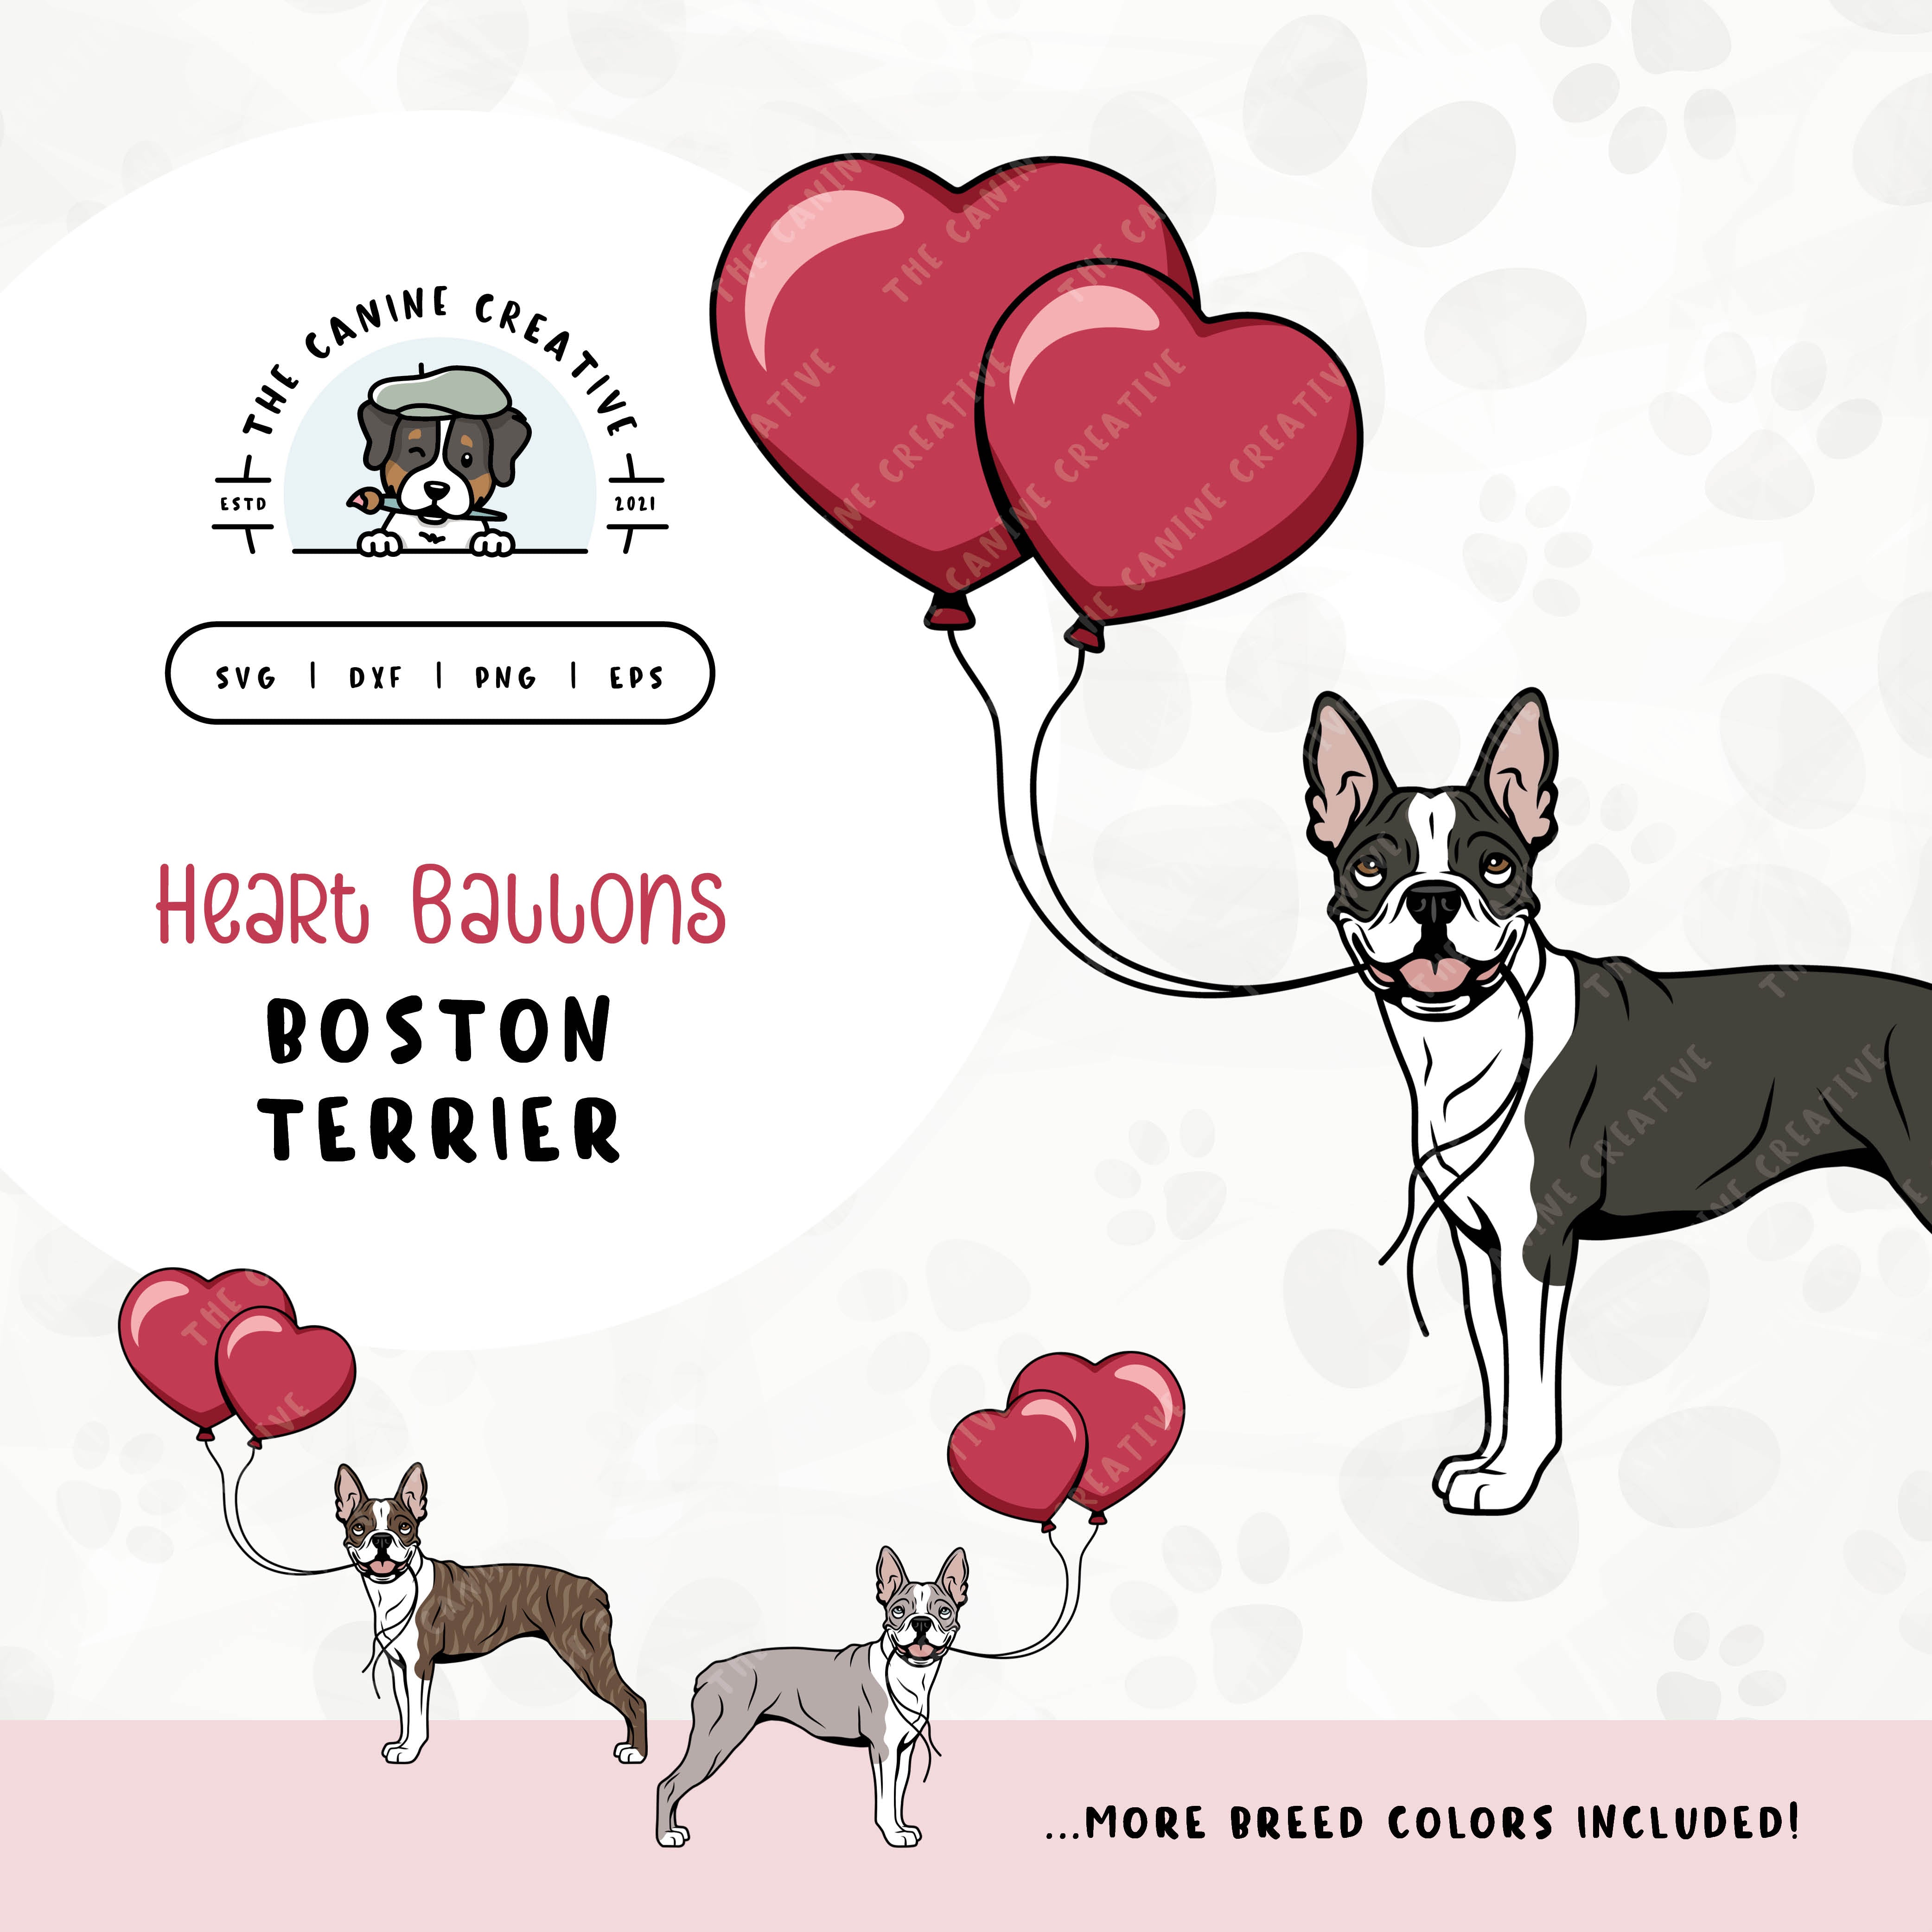 This charming illustration of a Boston Terrier features a dog holding heart-shaped balloons. File formats include: SVG, DXF, PNG, and EPS.